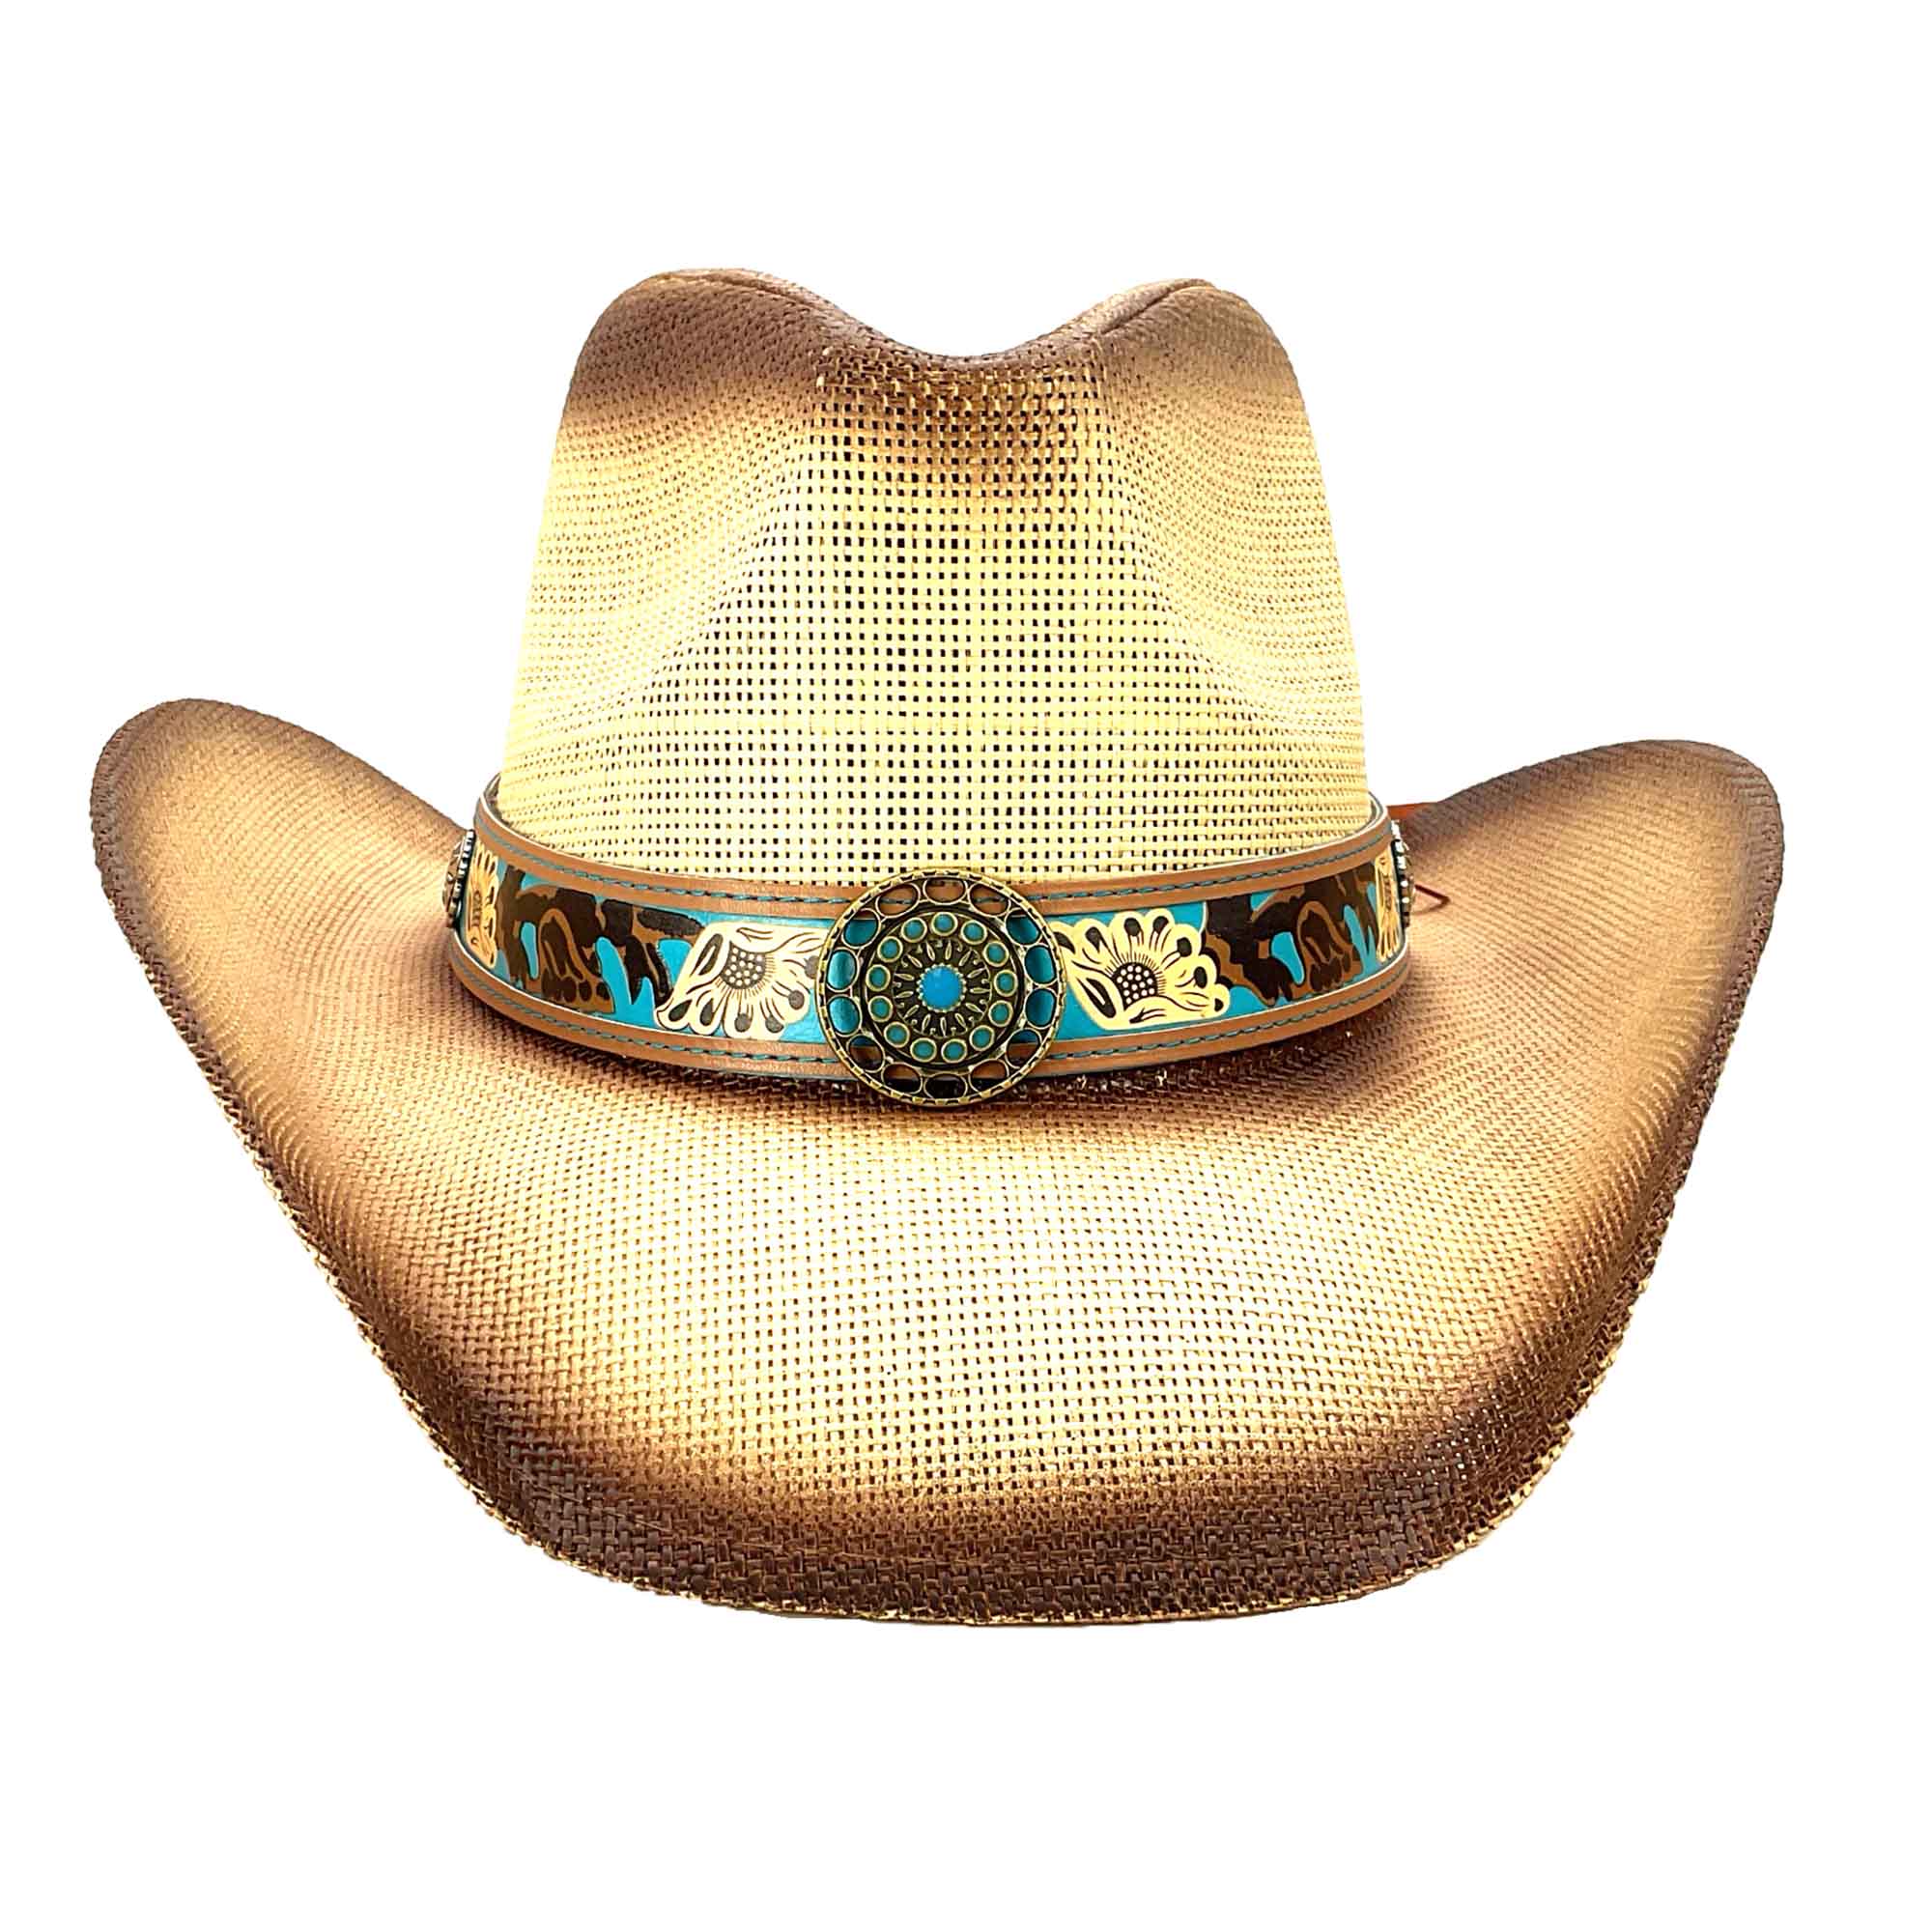 Straw Cowboy Hat with Turquoise Band and Concho - Milani Hats Cowboy Hat Milani Hats    